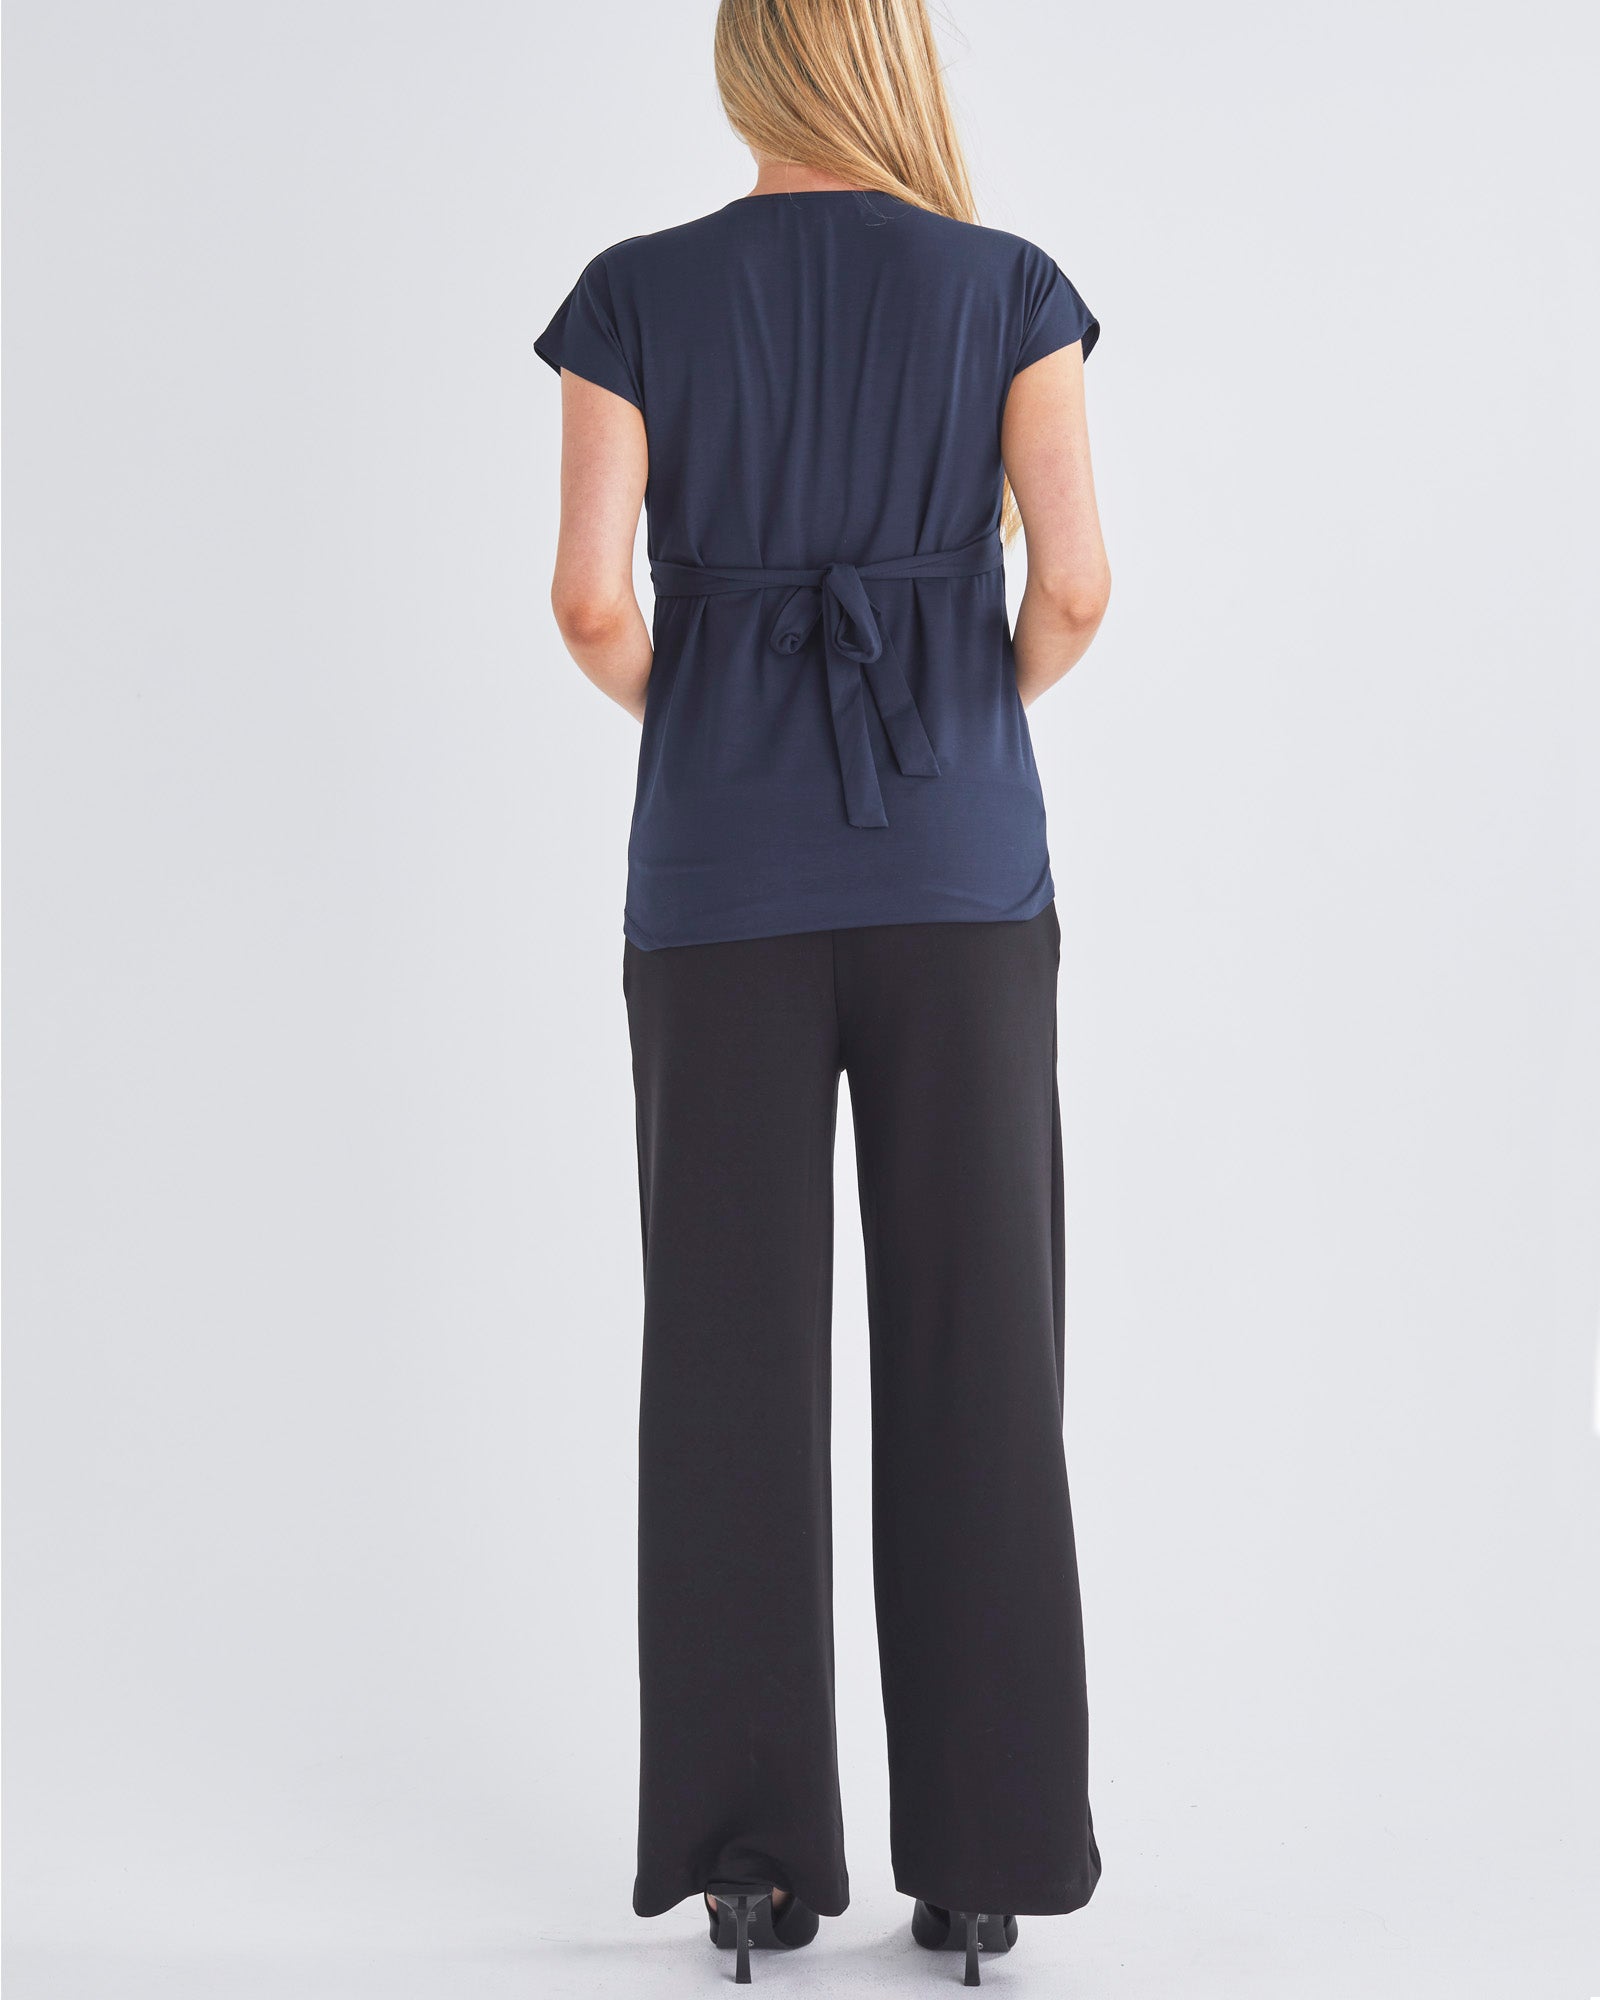 Back View - A Pregnant Woman Wearing Short Sleeve Nursing Friendly Maternity Crossover Navy Work Top  from Angel Maternity